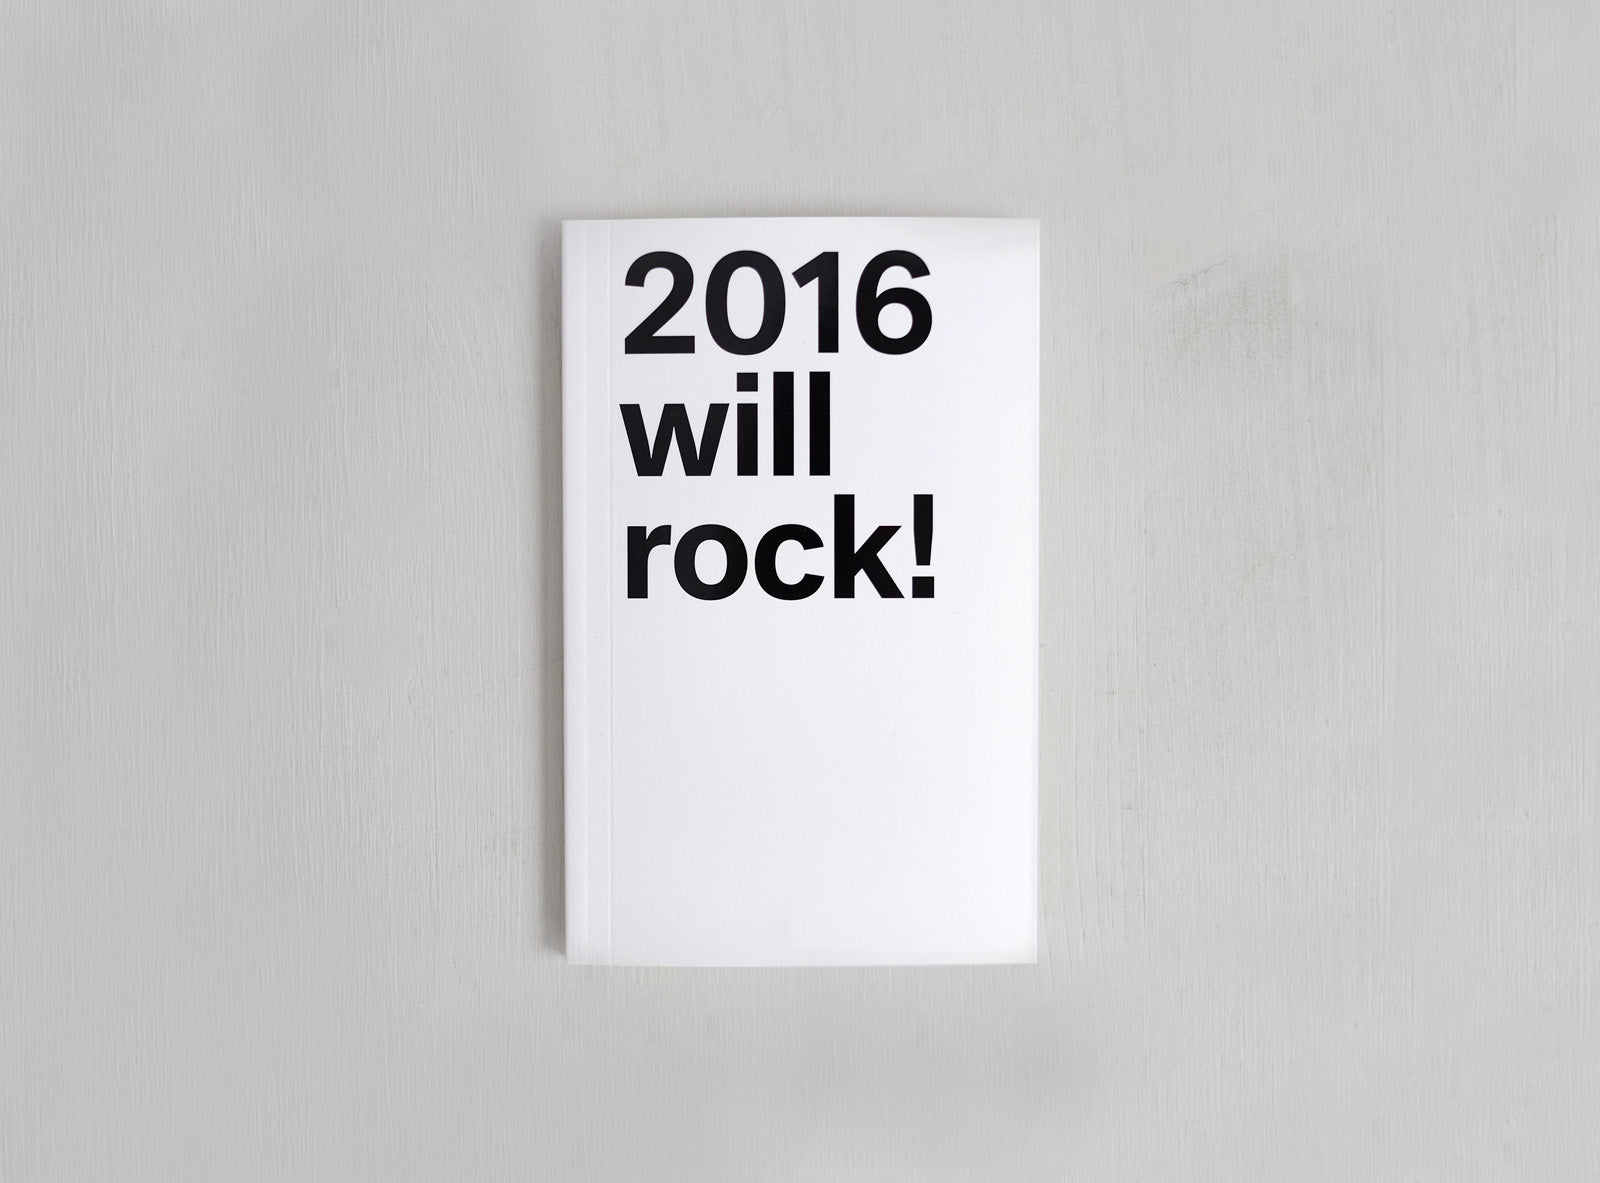 Planner from 2016 which motto was 206 will rock!